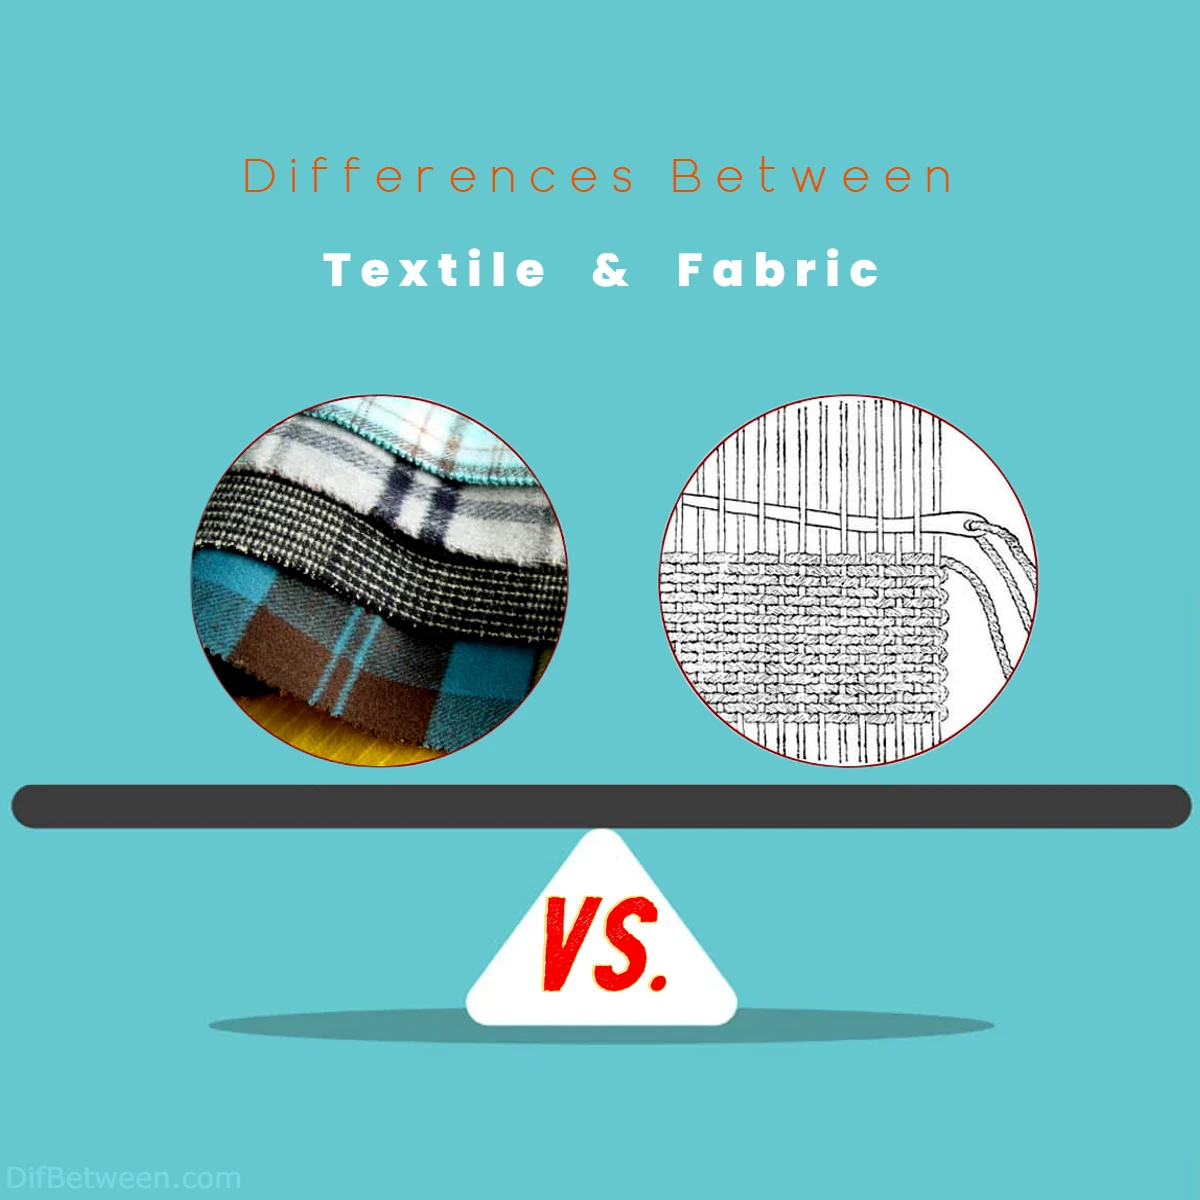 Differences Between Textile vs Fabric